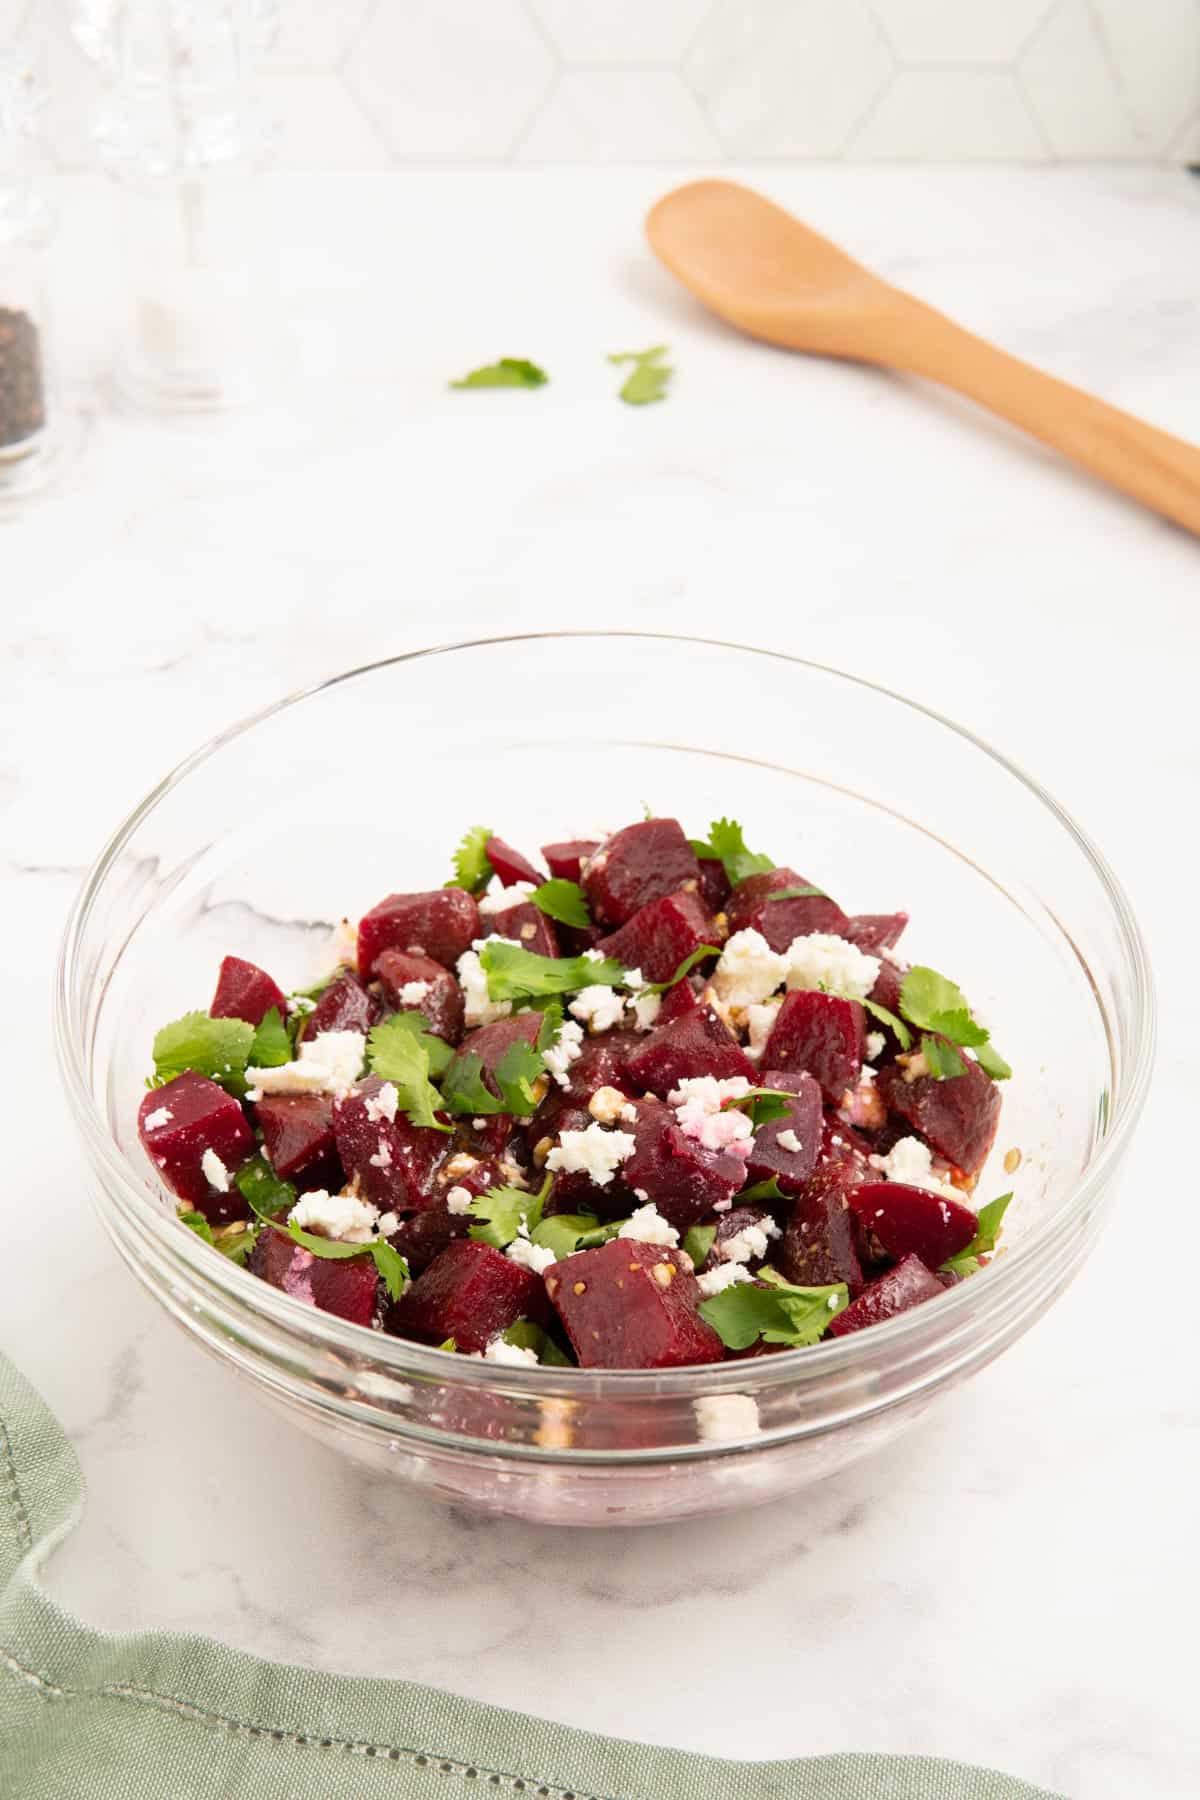 Beetroot, feta, and parsley in a glass bowl.